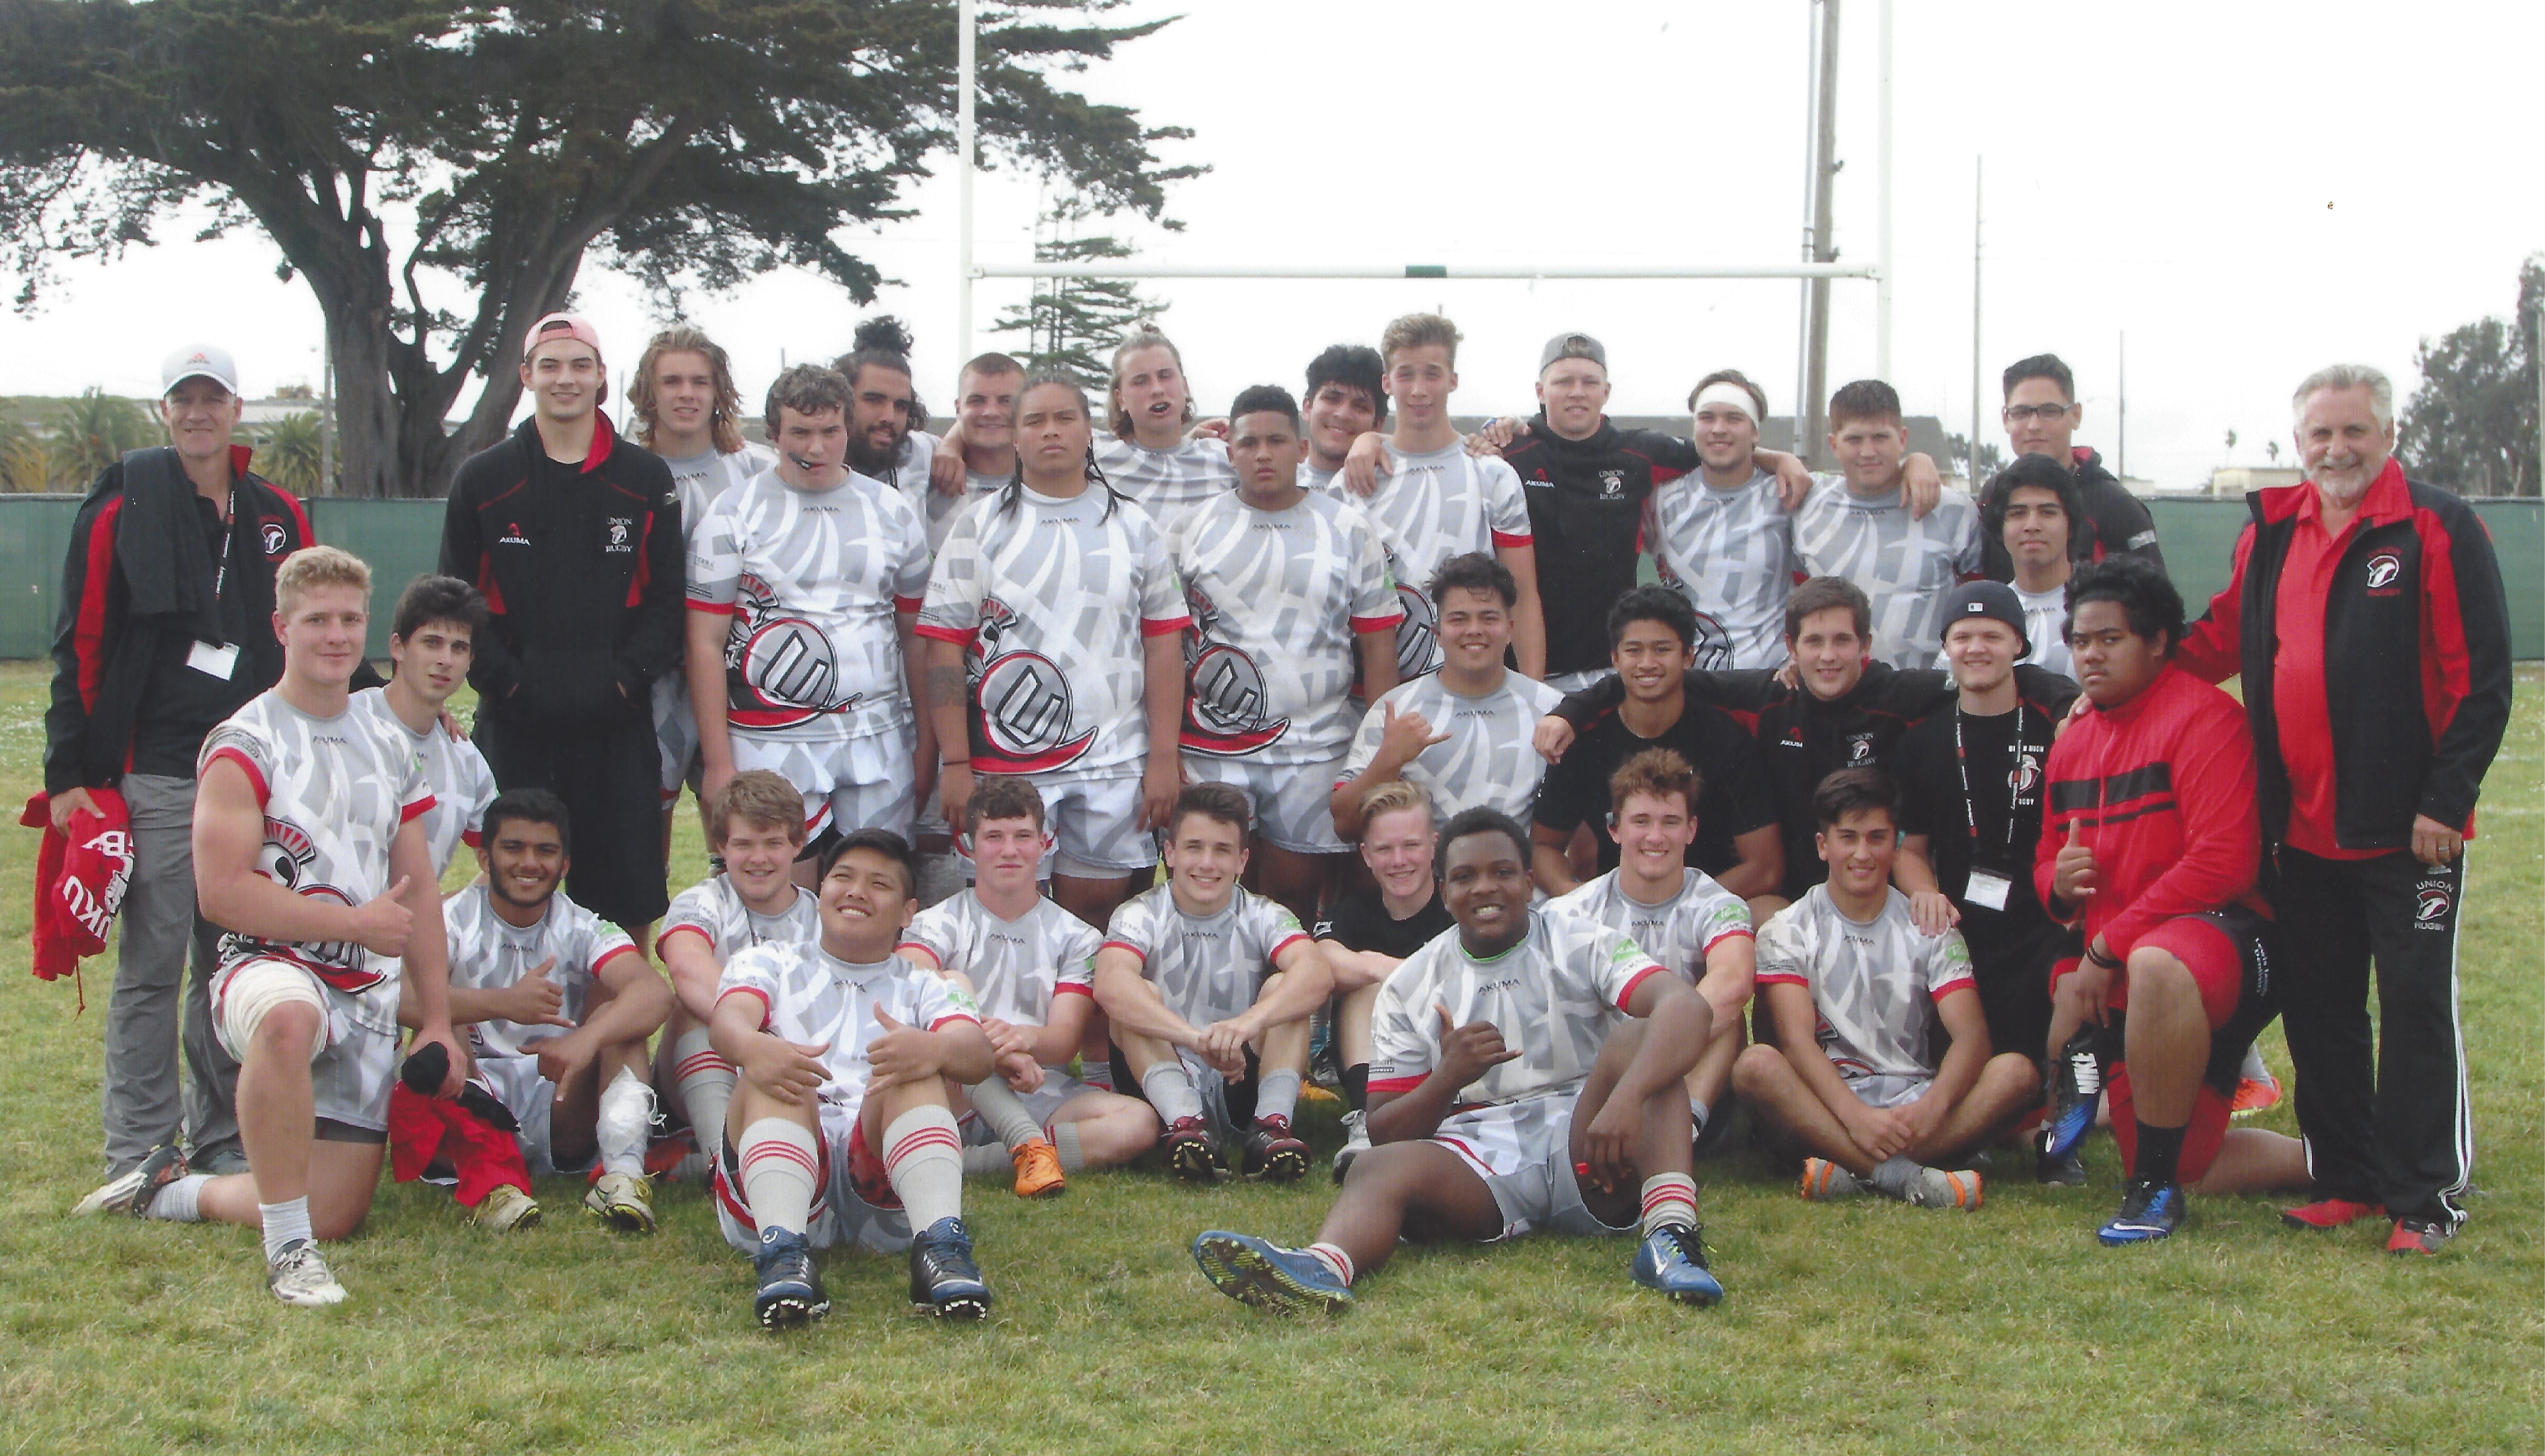 Union 2016 rugby team (contributed photo)